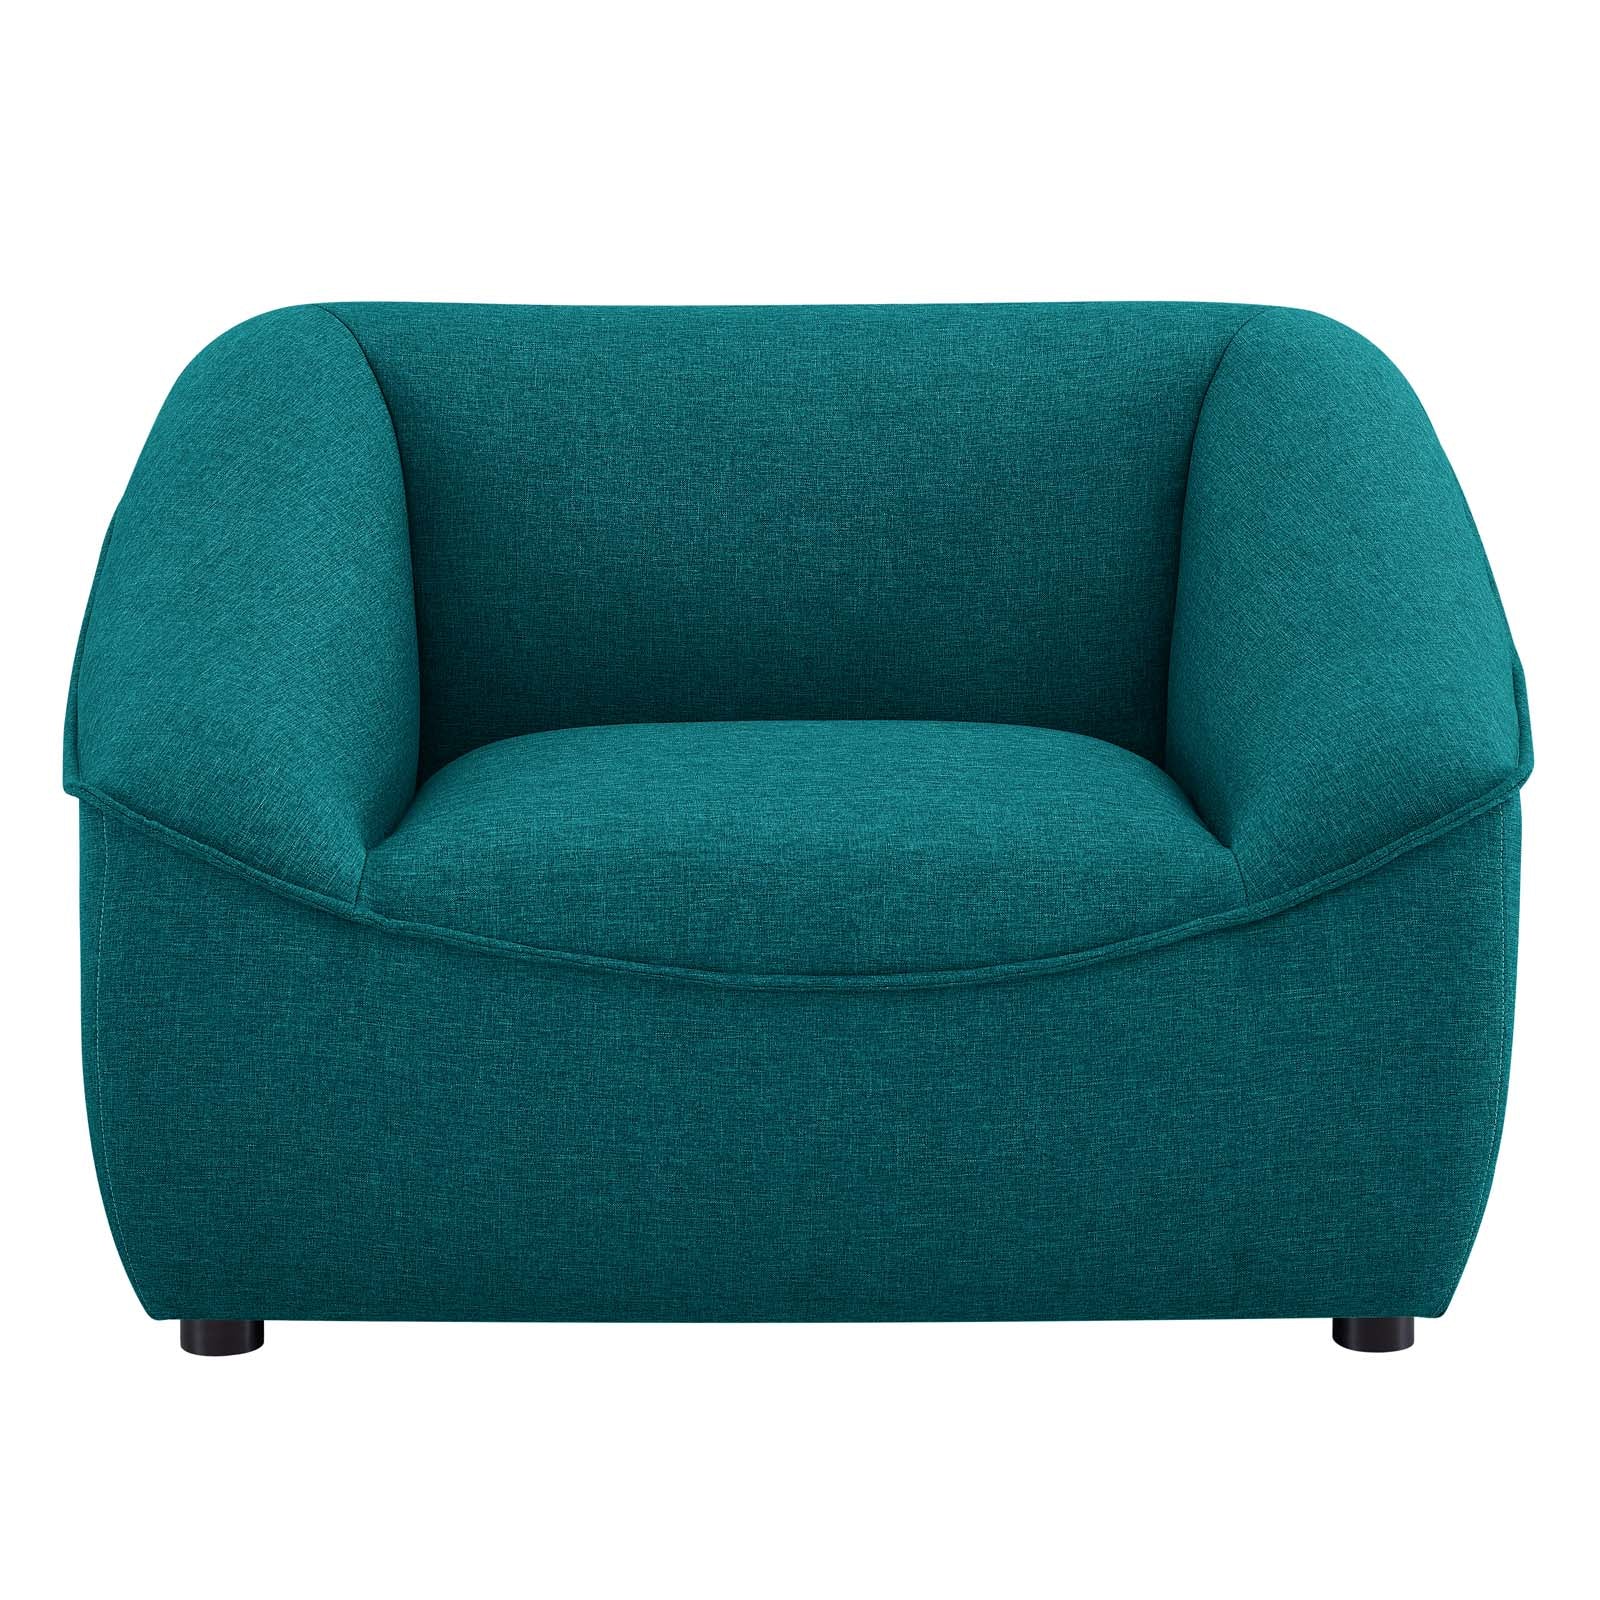 Comprise Armchair - East Shore Modern Home Furnishings